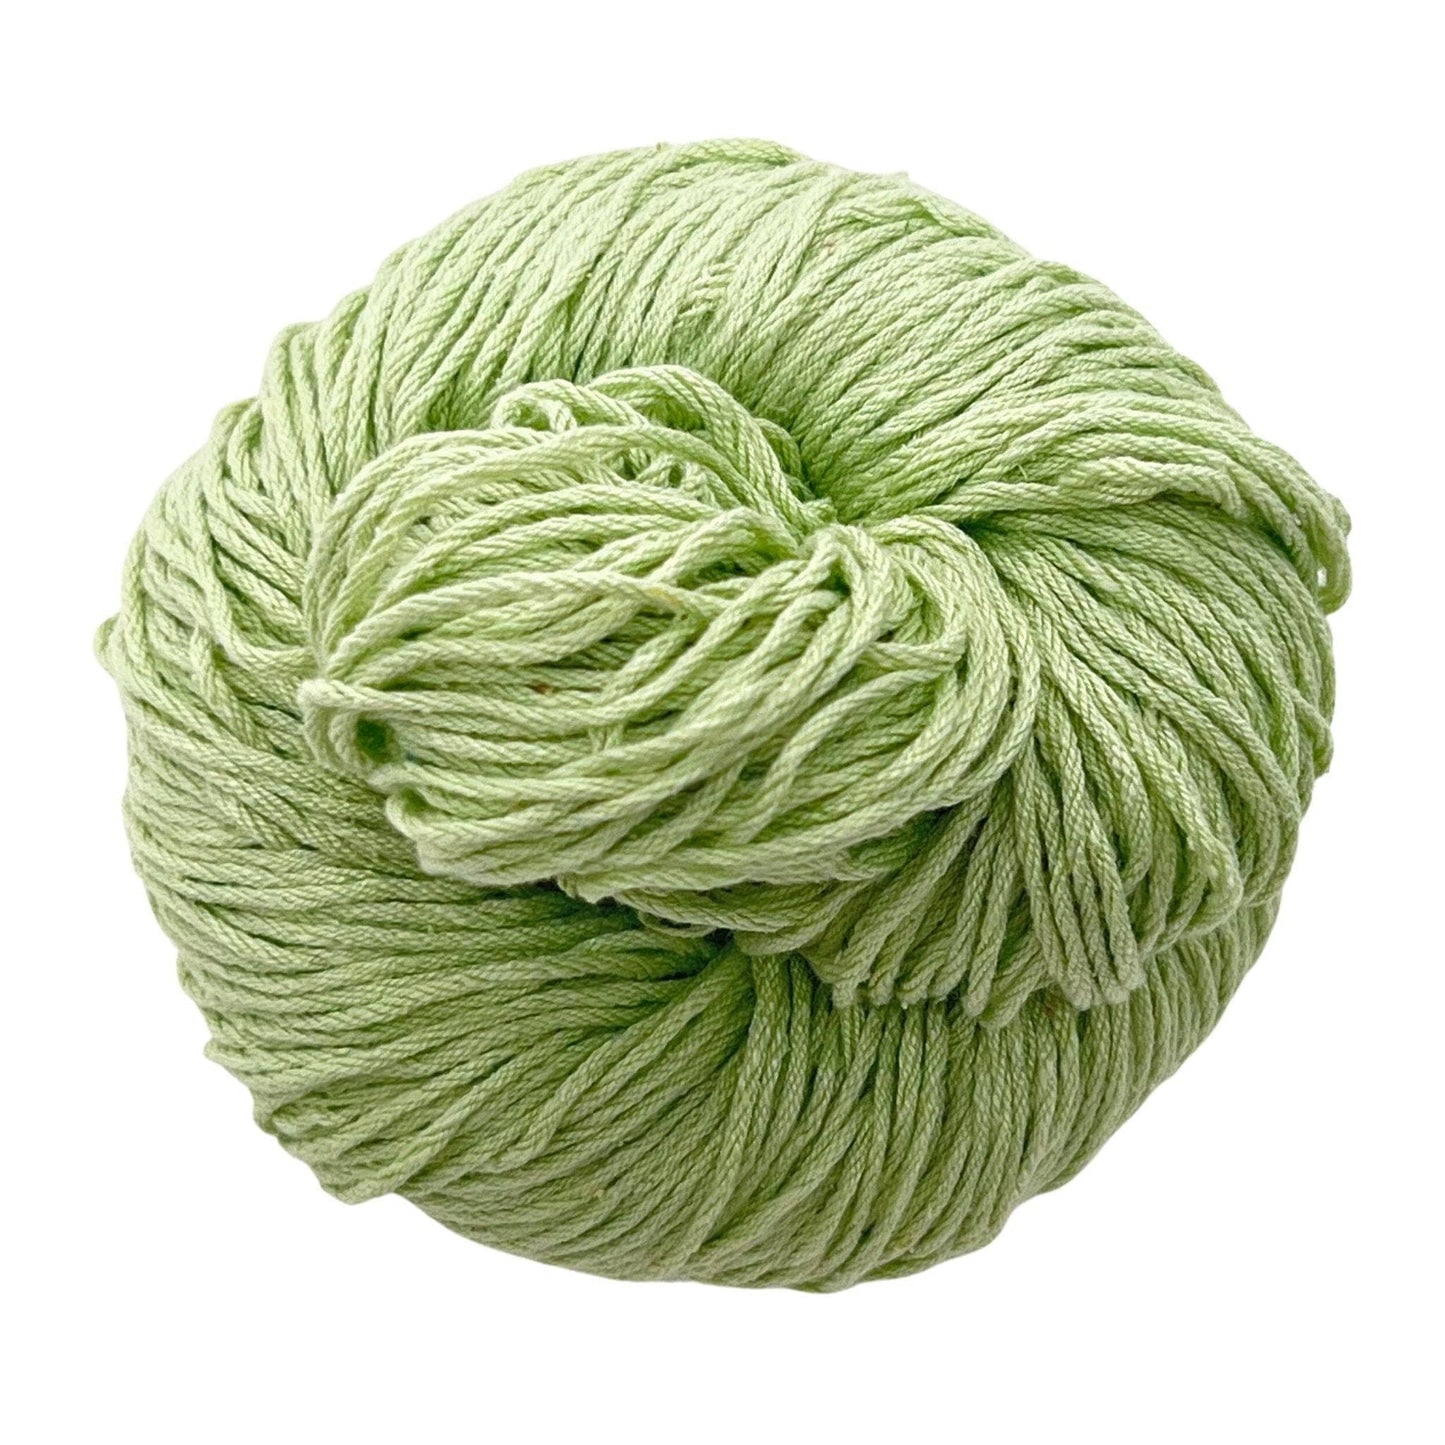 A skein of Mulberry silk fingering yarn in the colorway 'pale mint' on a white background.